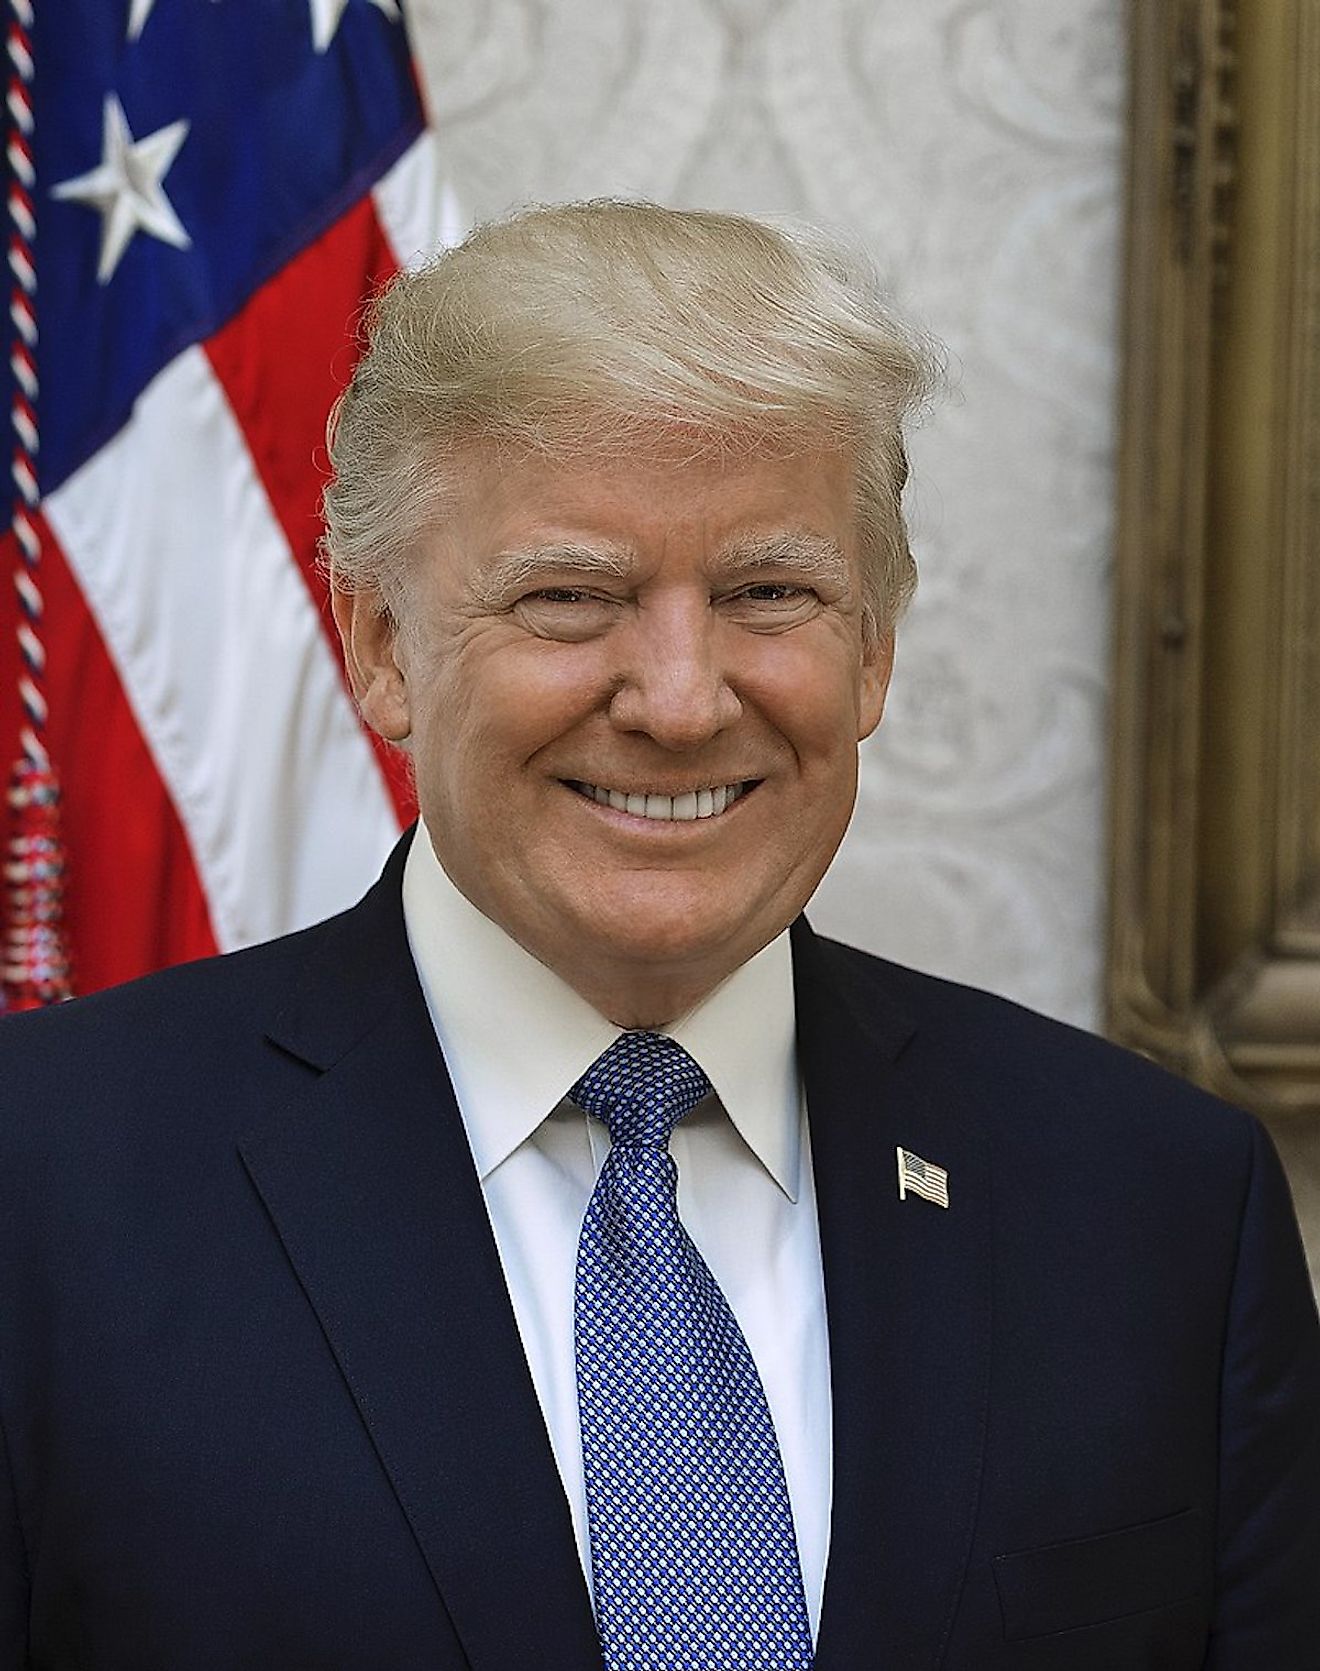 Official White House portrait of President Donald J. Trump taken by Shealah Craighead on October 6, 2017 in Washington, D.C.